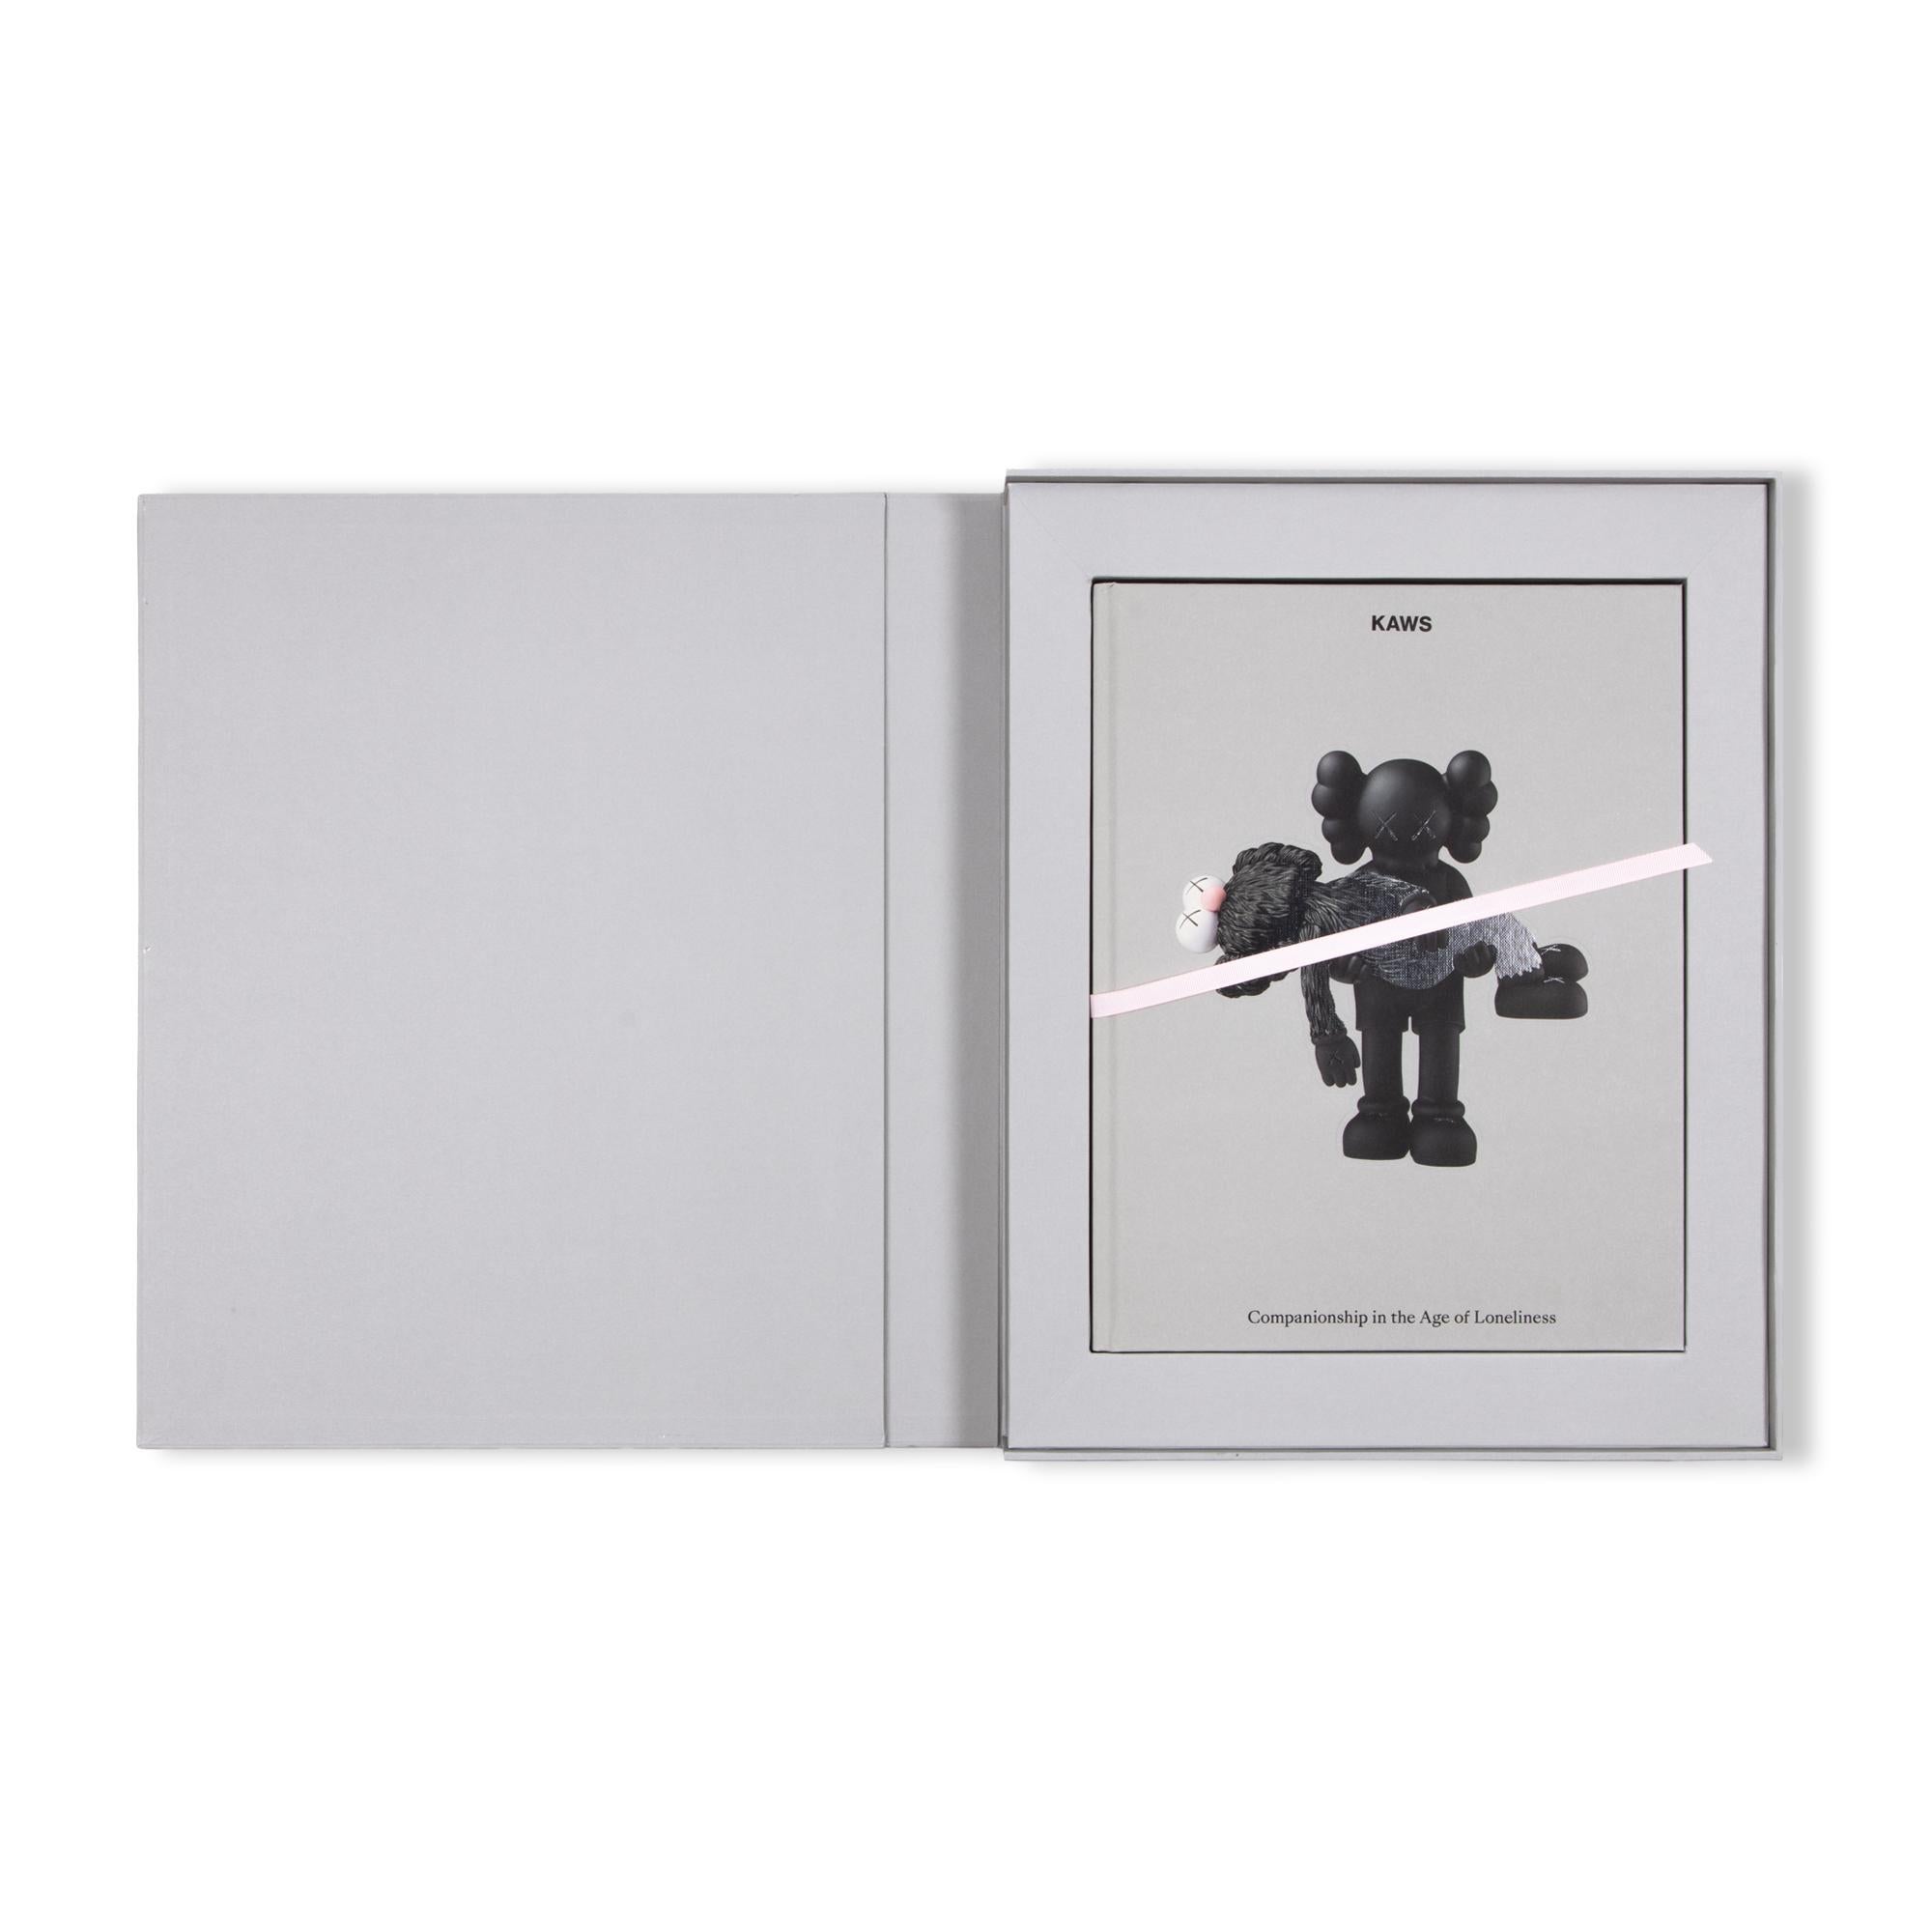 KAWS, Gone - Screenprint incl. Limited Edition Catalogue, Signed Print 4